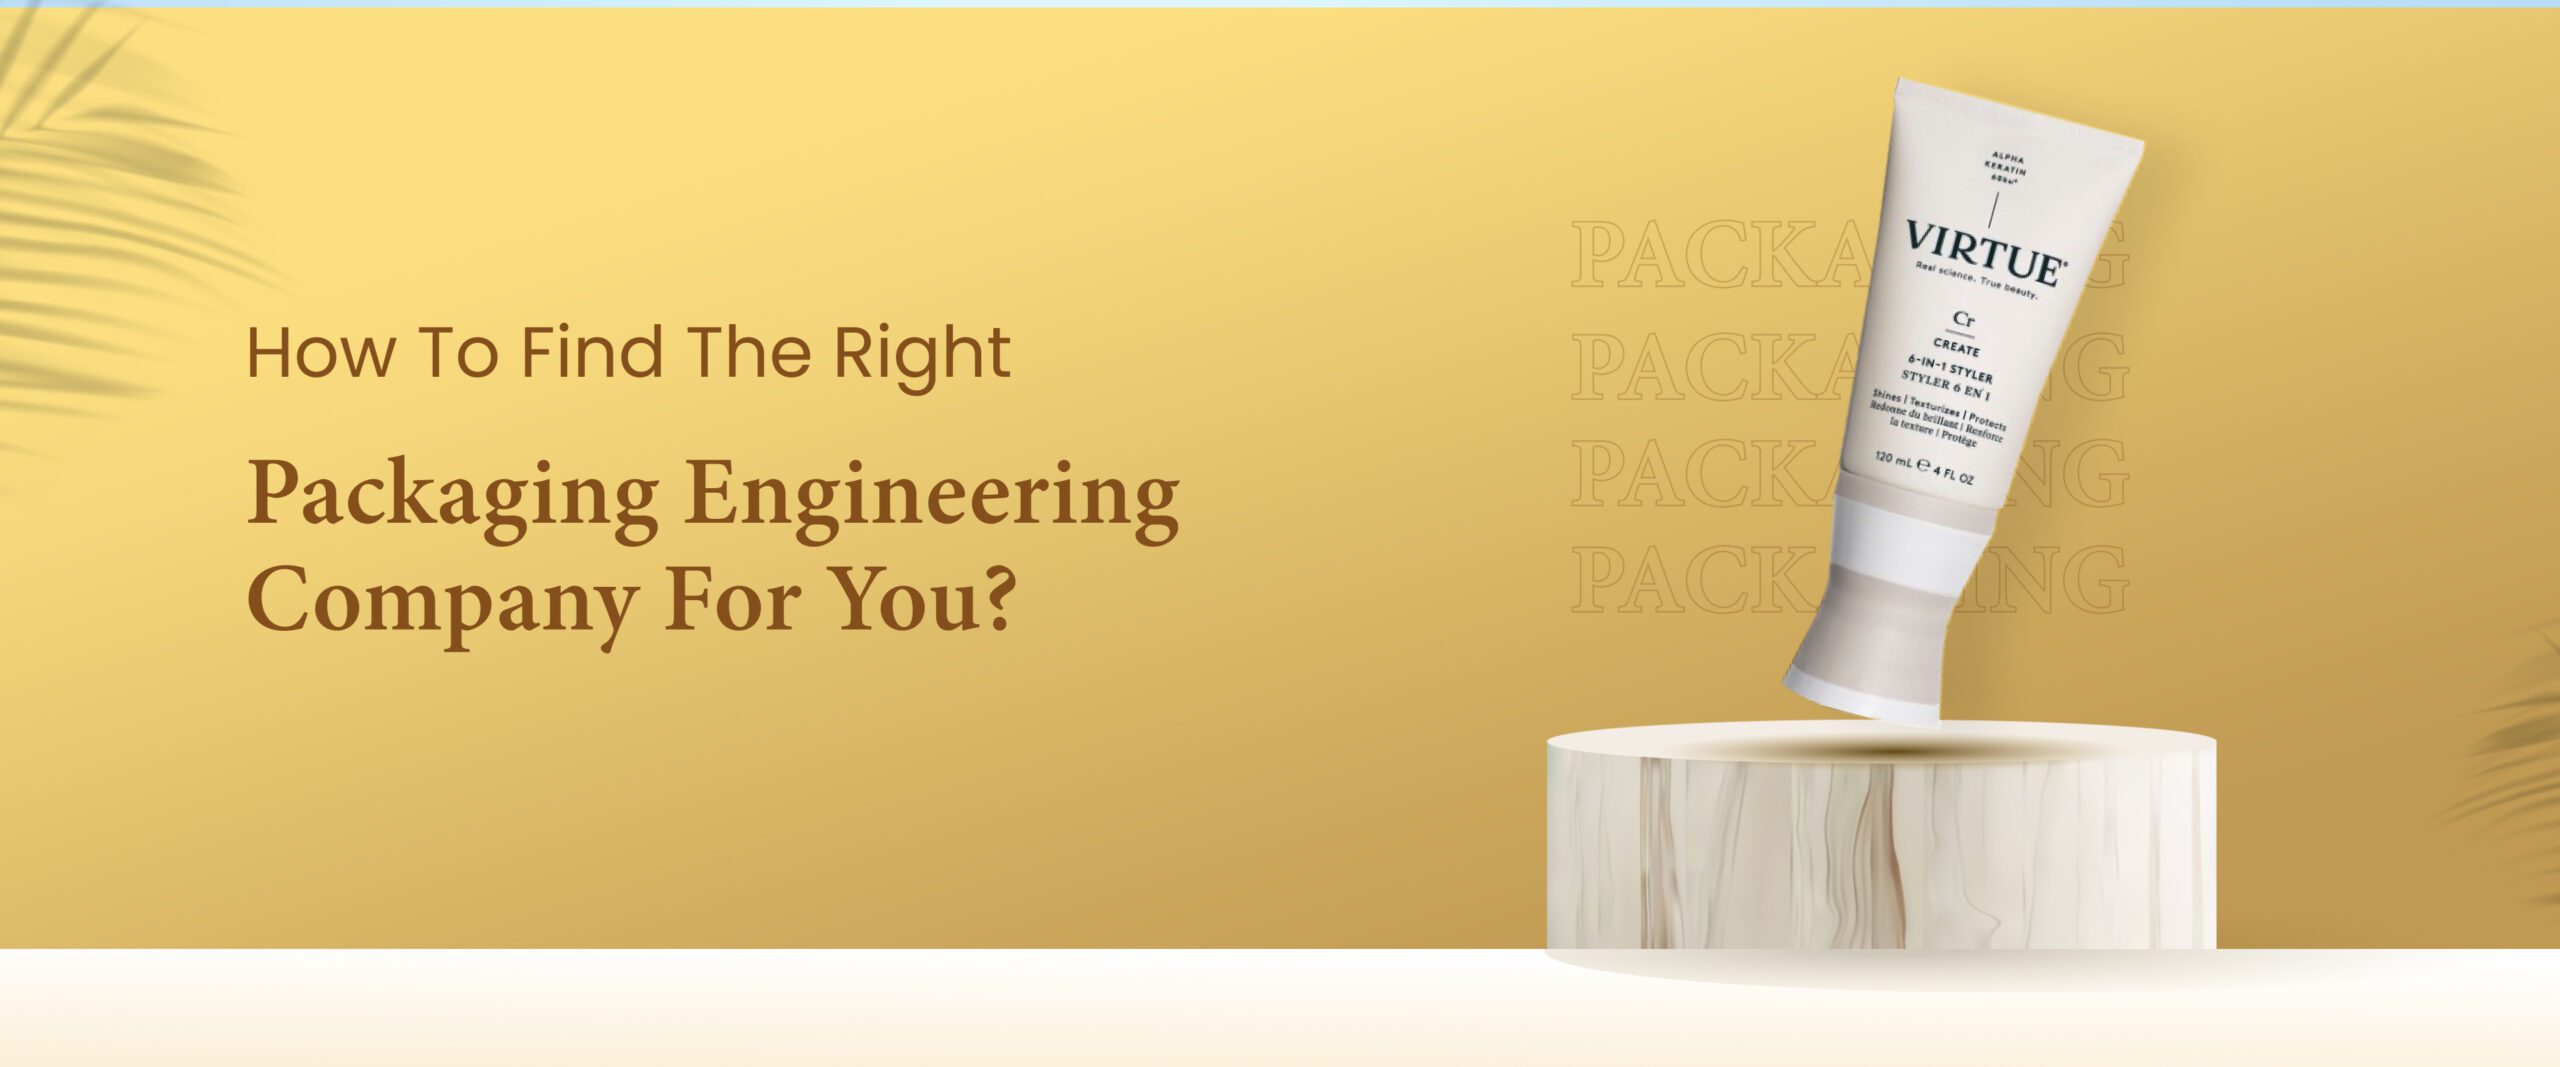 How to Find the Right Packaging Engineering Company for You?